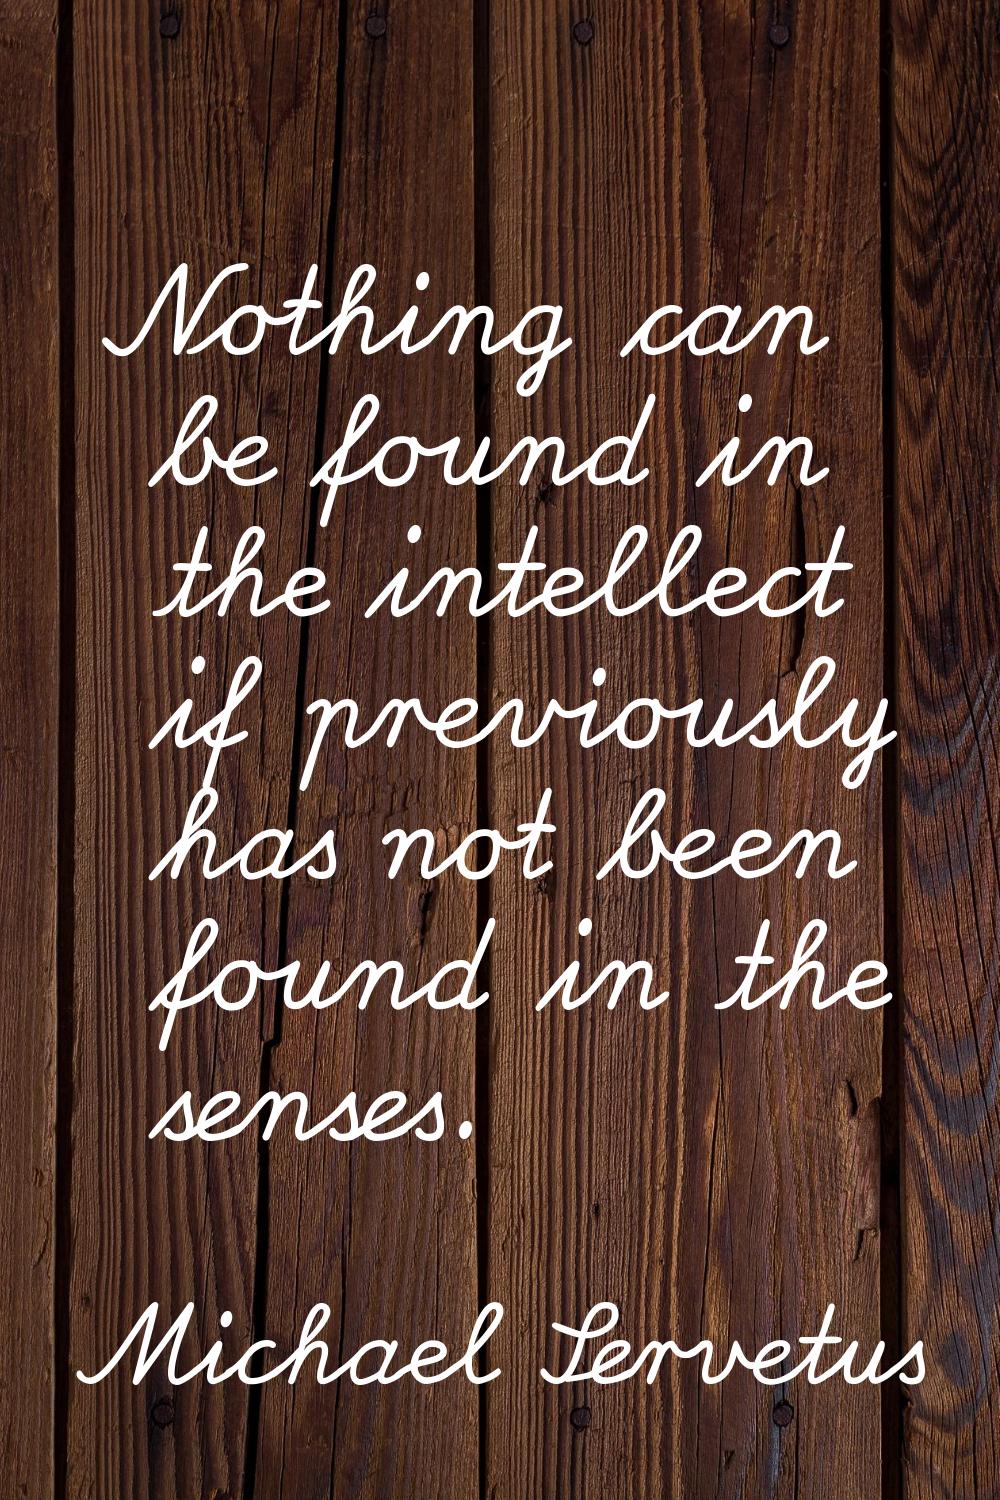 Nothing can be found in the intellect if previously has not been found in the senses.